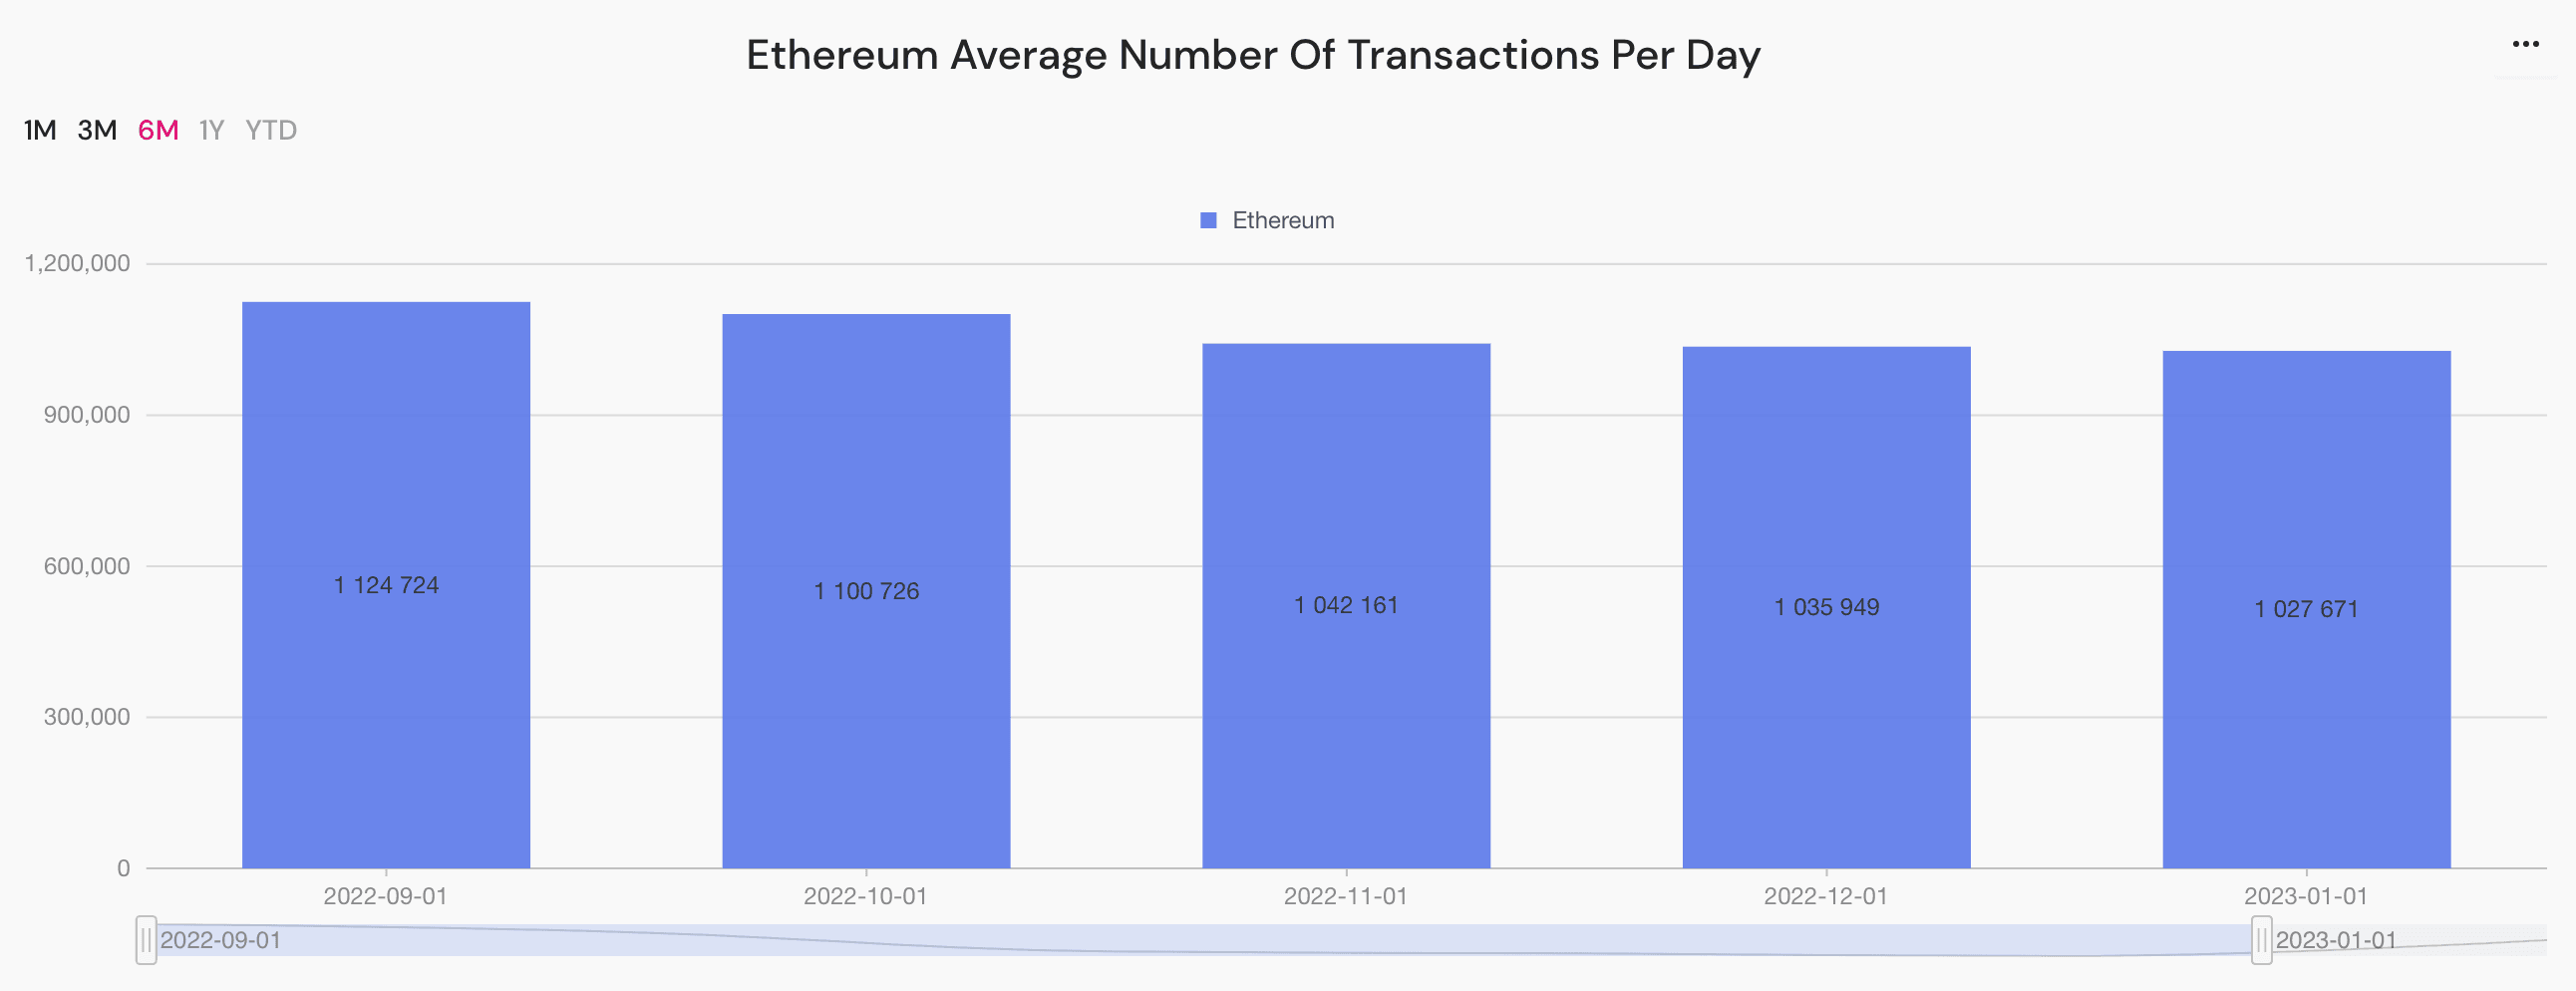 ethereum average number of transactions per day